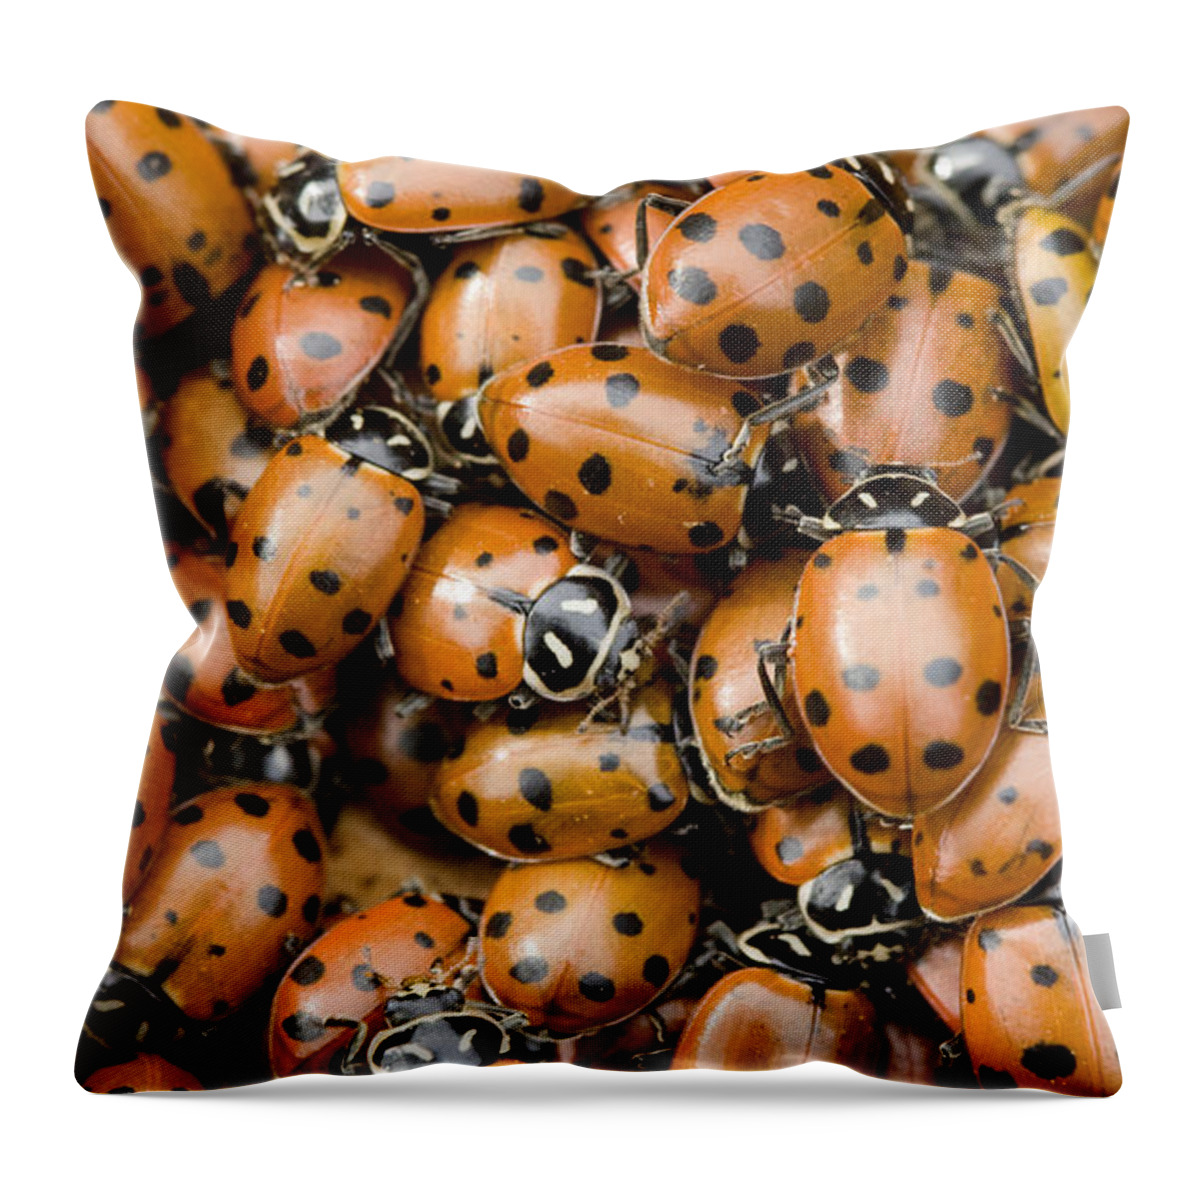 00429784 Throw Pillow featuring the photograph Convergent Lady Beetles Gathering by Sebastian Kennerknecht